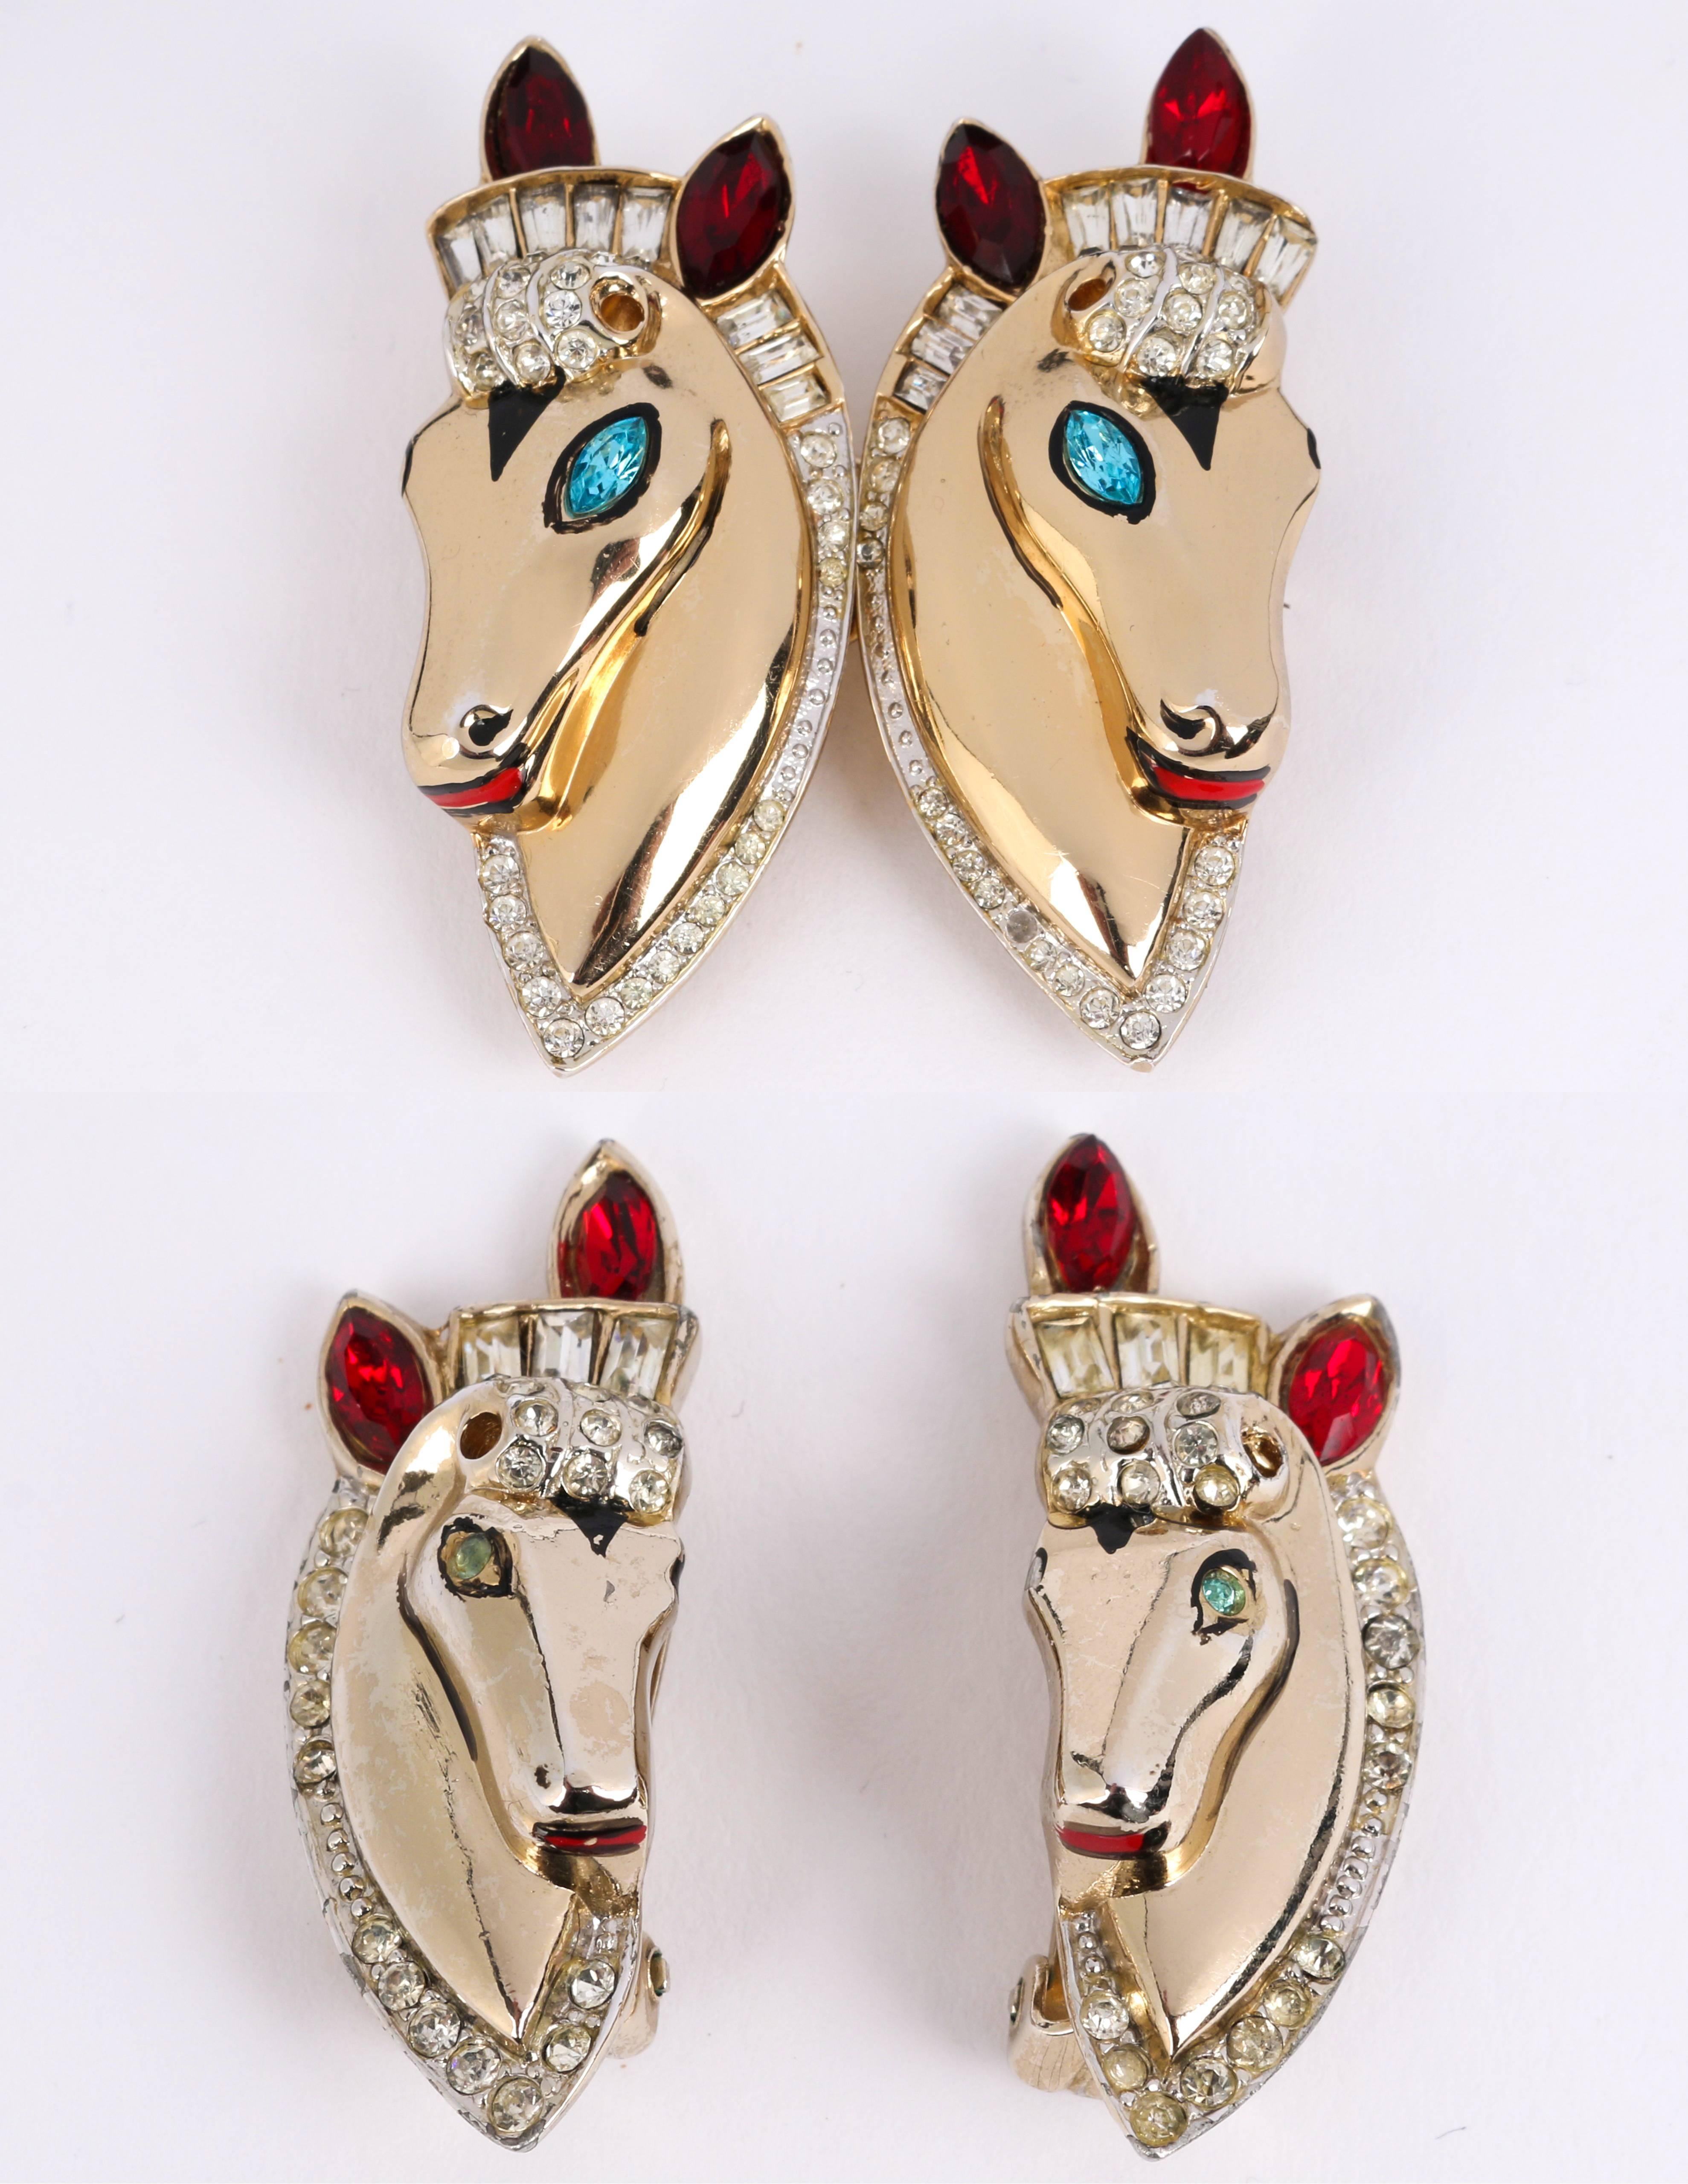 Vintage circa July 13,1943 Coro Craft (designed by A. Katz) gold horse duette brooch/fur clip and clip-on earrings demi parure set. Two horse heads can be worn together as a brooch or separate as fur clips. Brooch and earrings are gold tone with